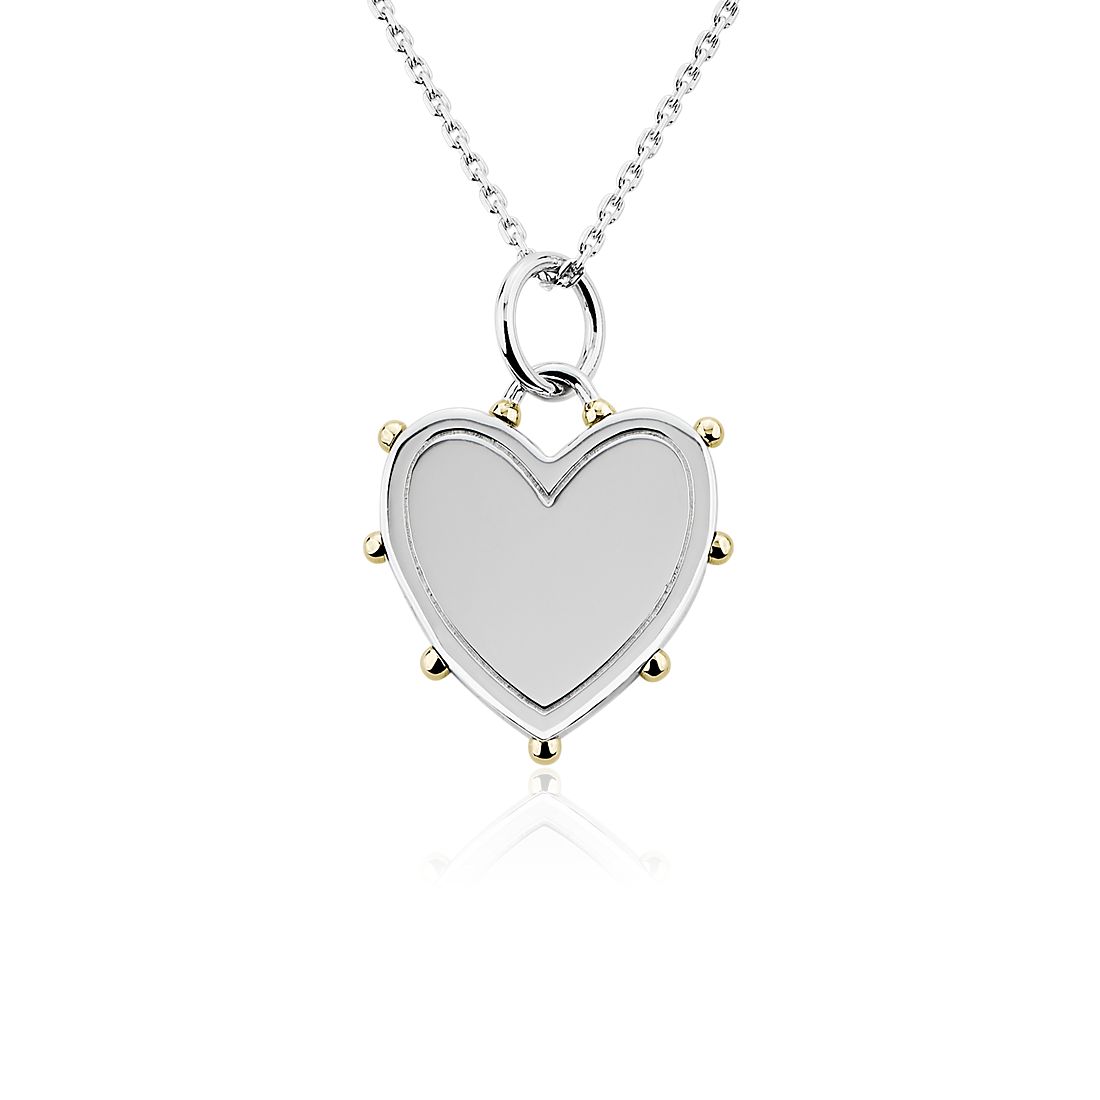 18" Monica Rich Kosann Two-Tone Heart Charm Necklace in Sterling Silver and 18k Yellow Gold (1.4 mm)